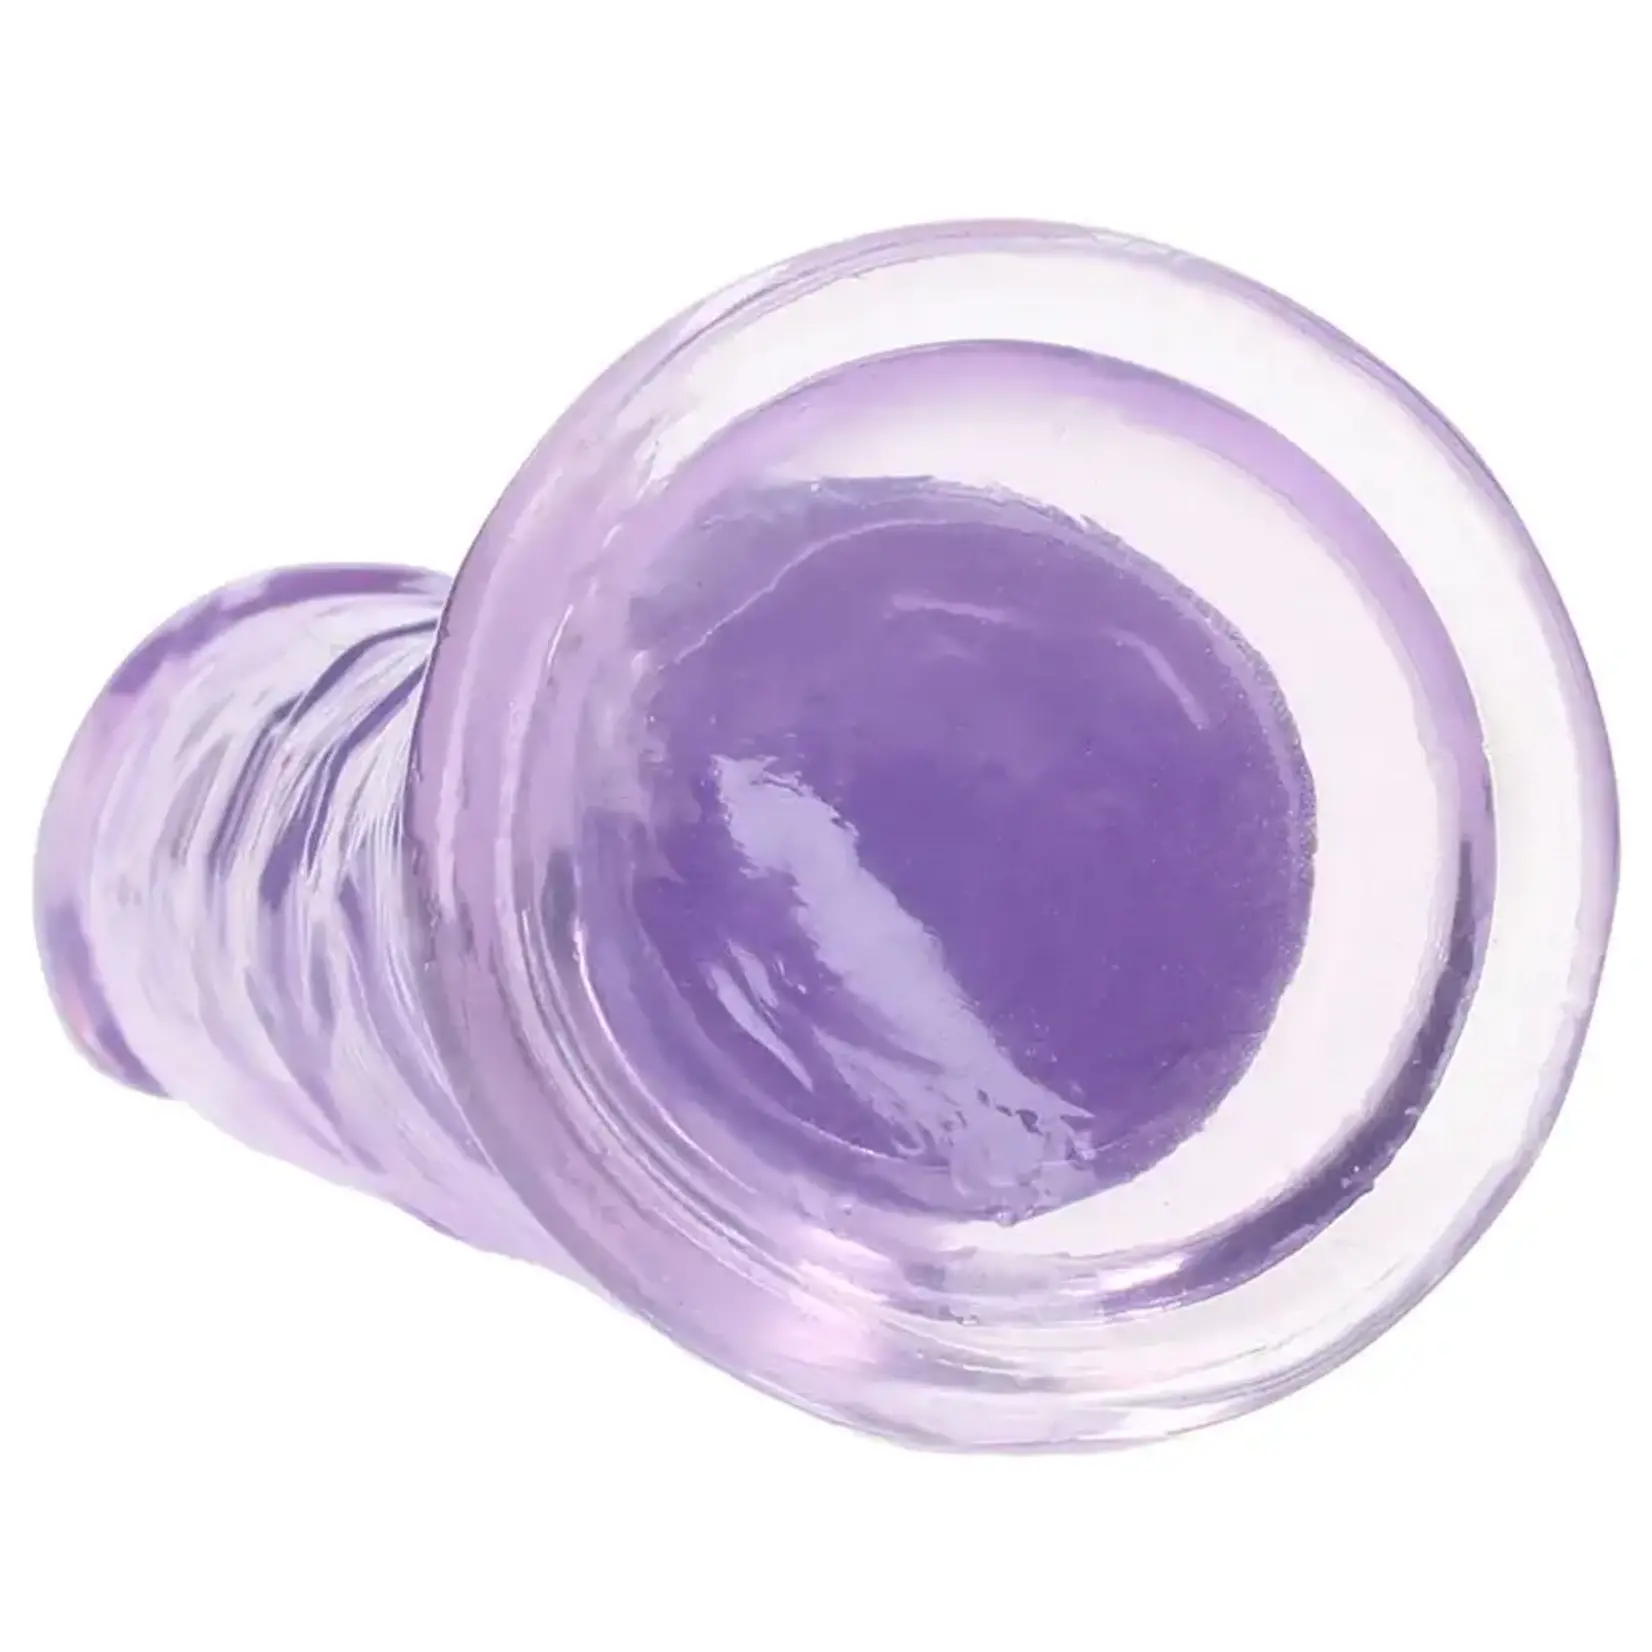 SHOTS REALROCK CRYSTAL CLEAR JELLY 6 INCH DILDO